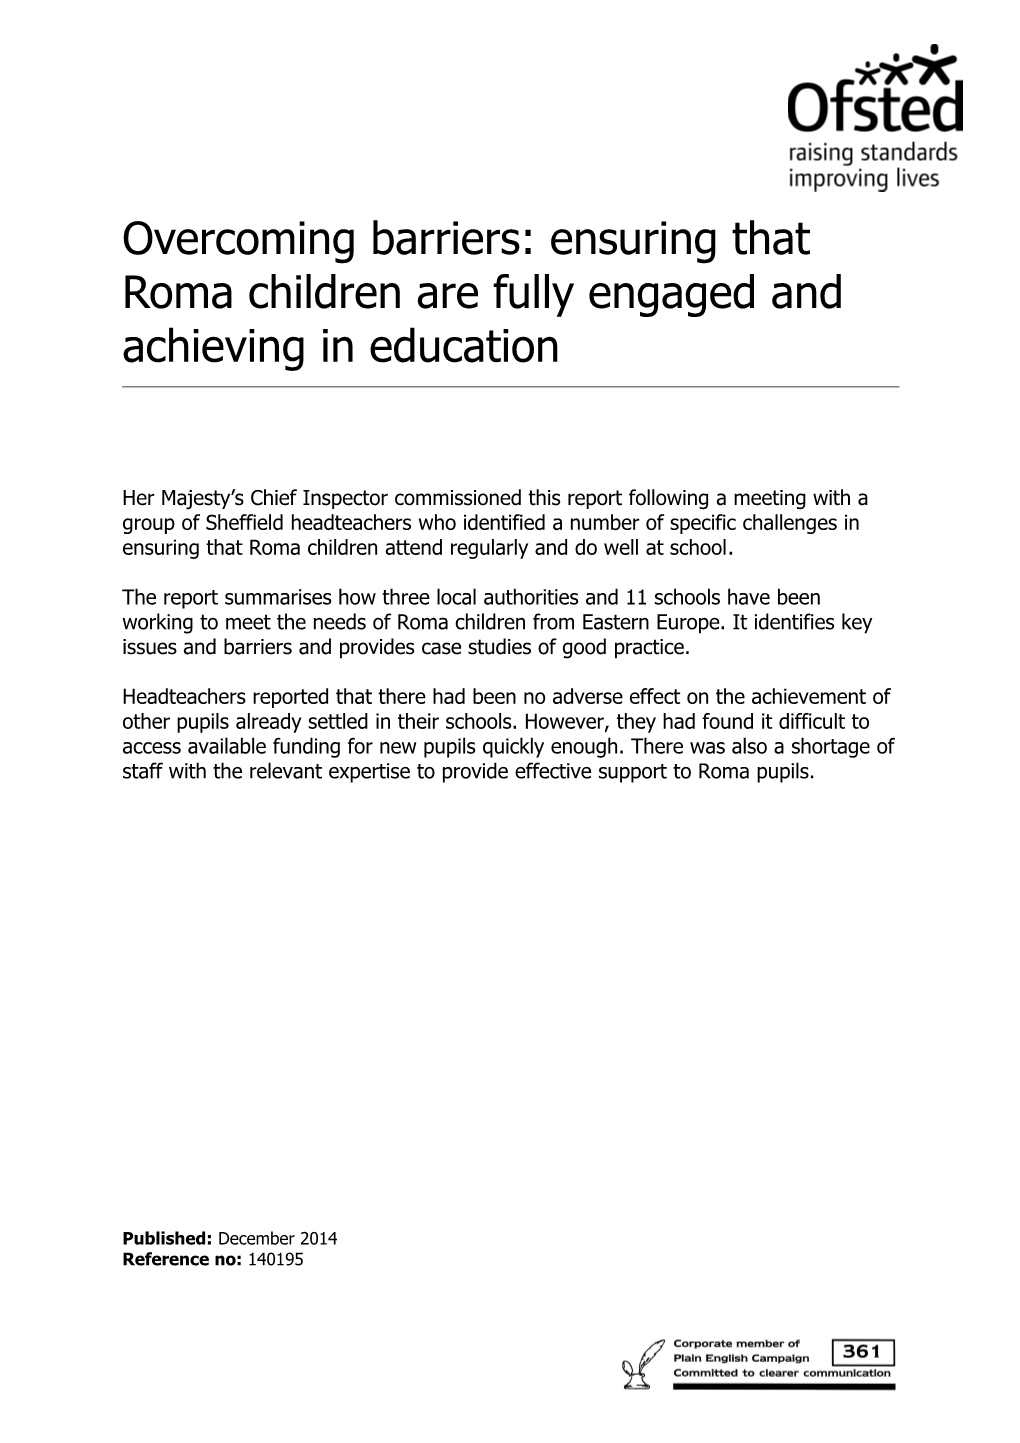 How Local Authorities and Schools Are Overcoming Barriers